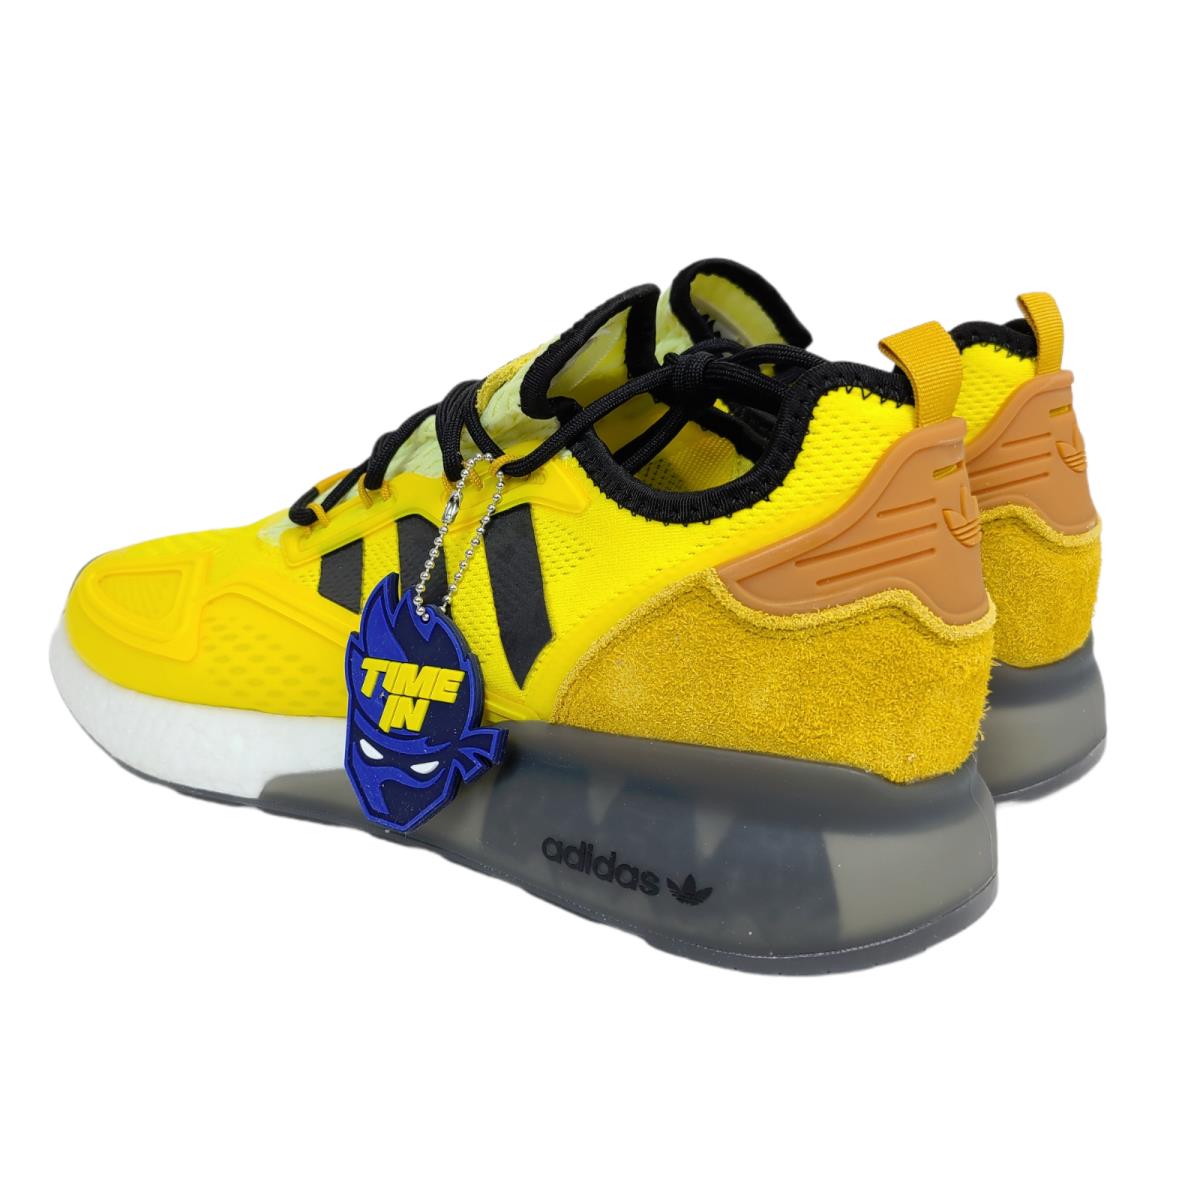 Adidas shoes Boost - Yellow 11